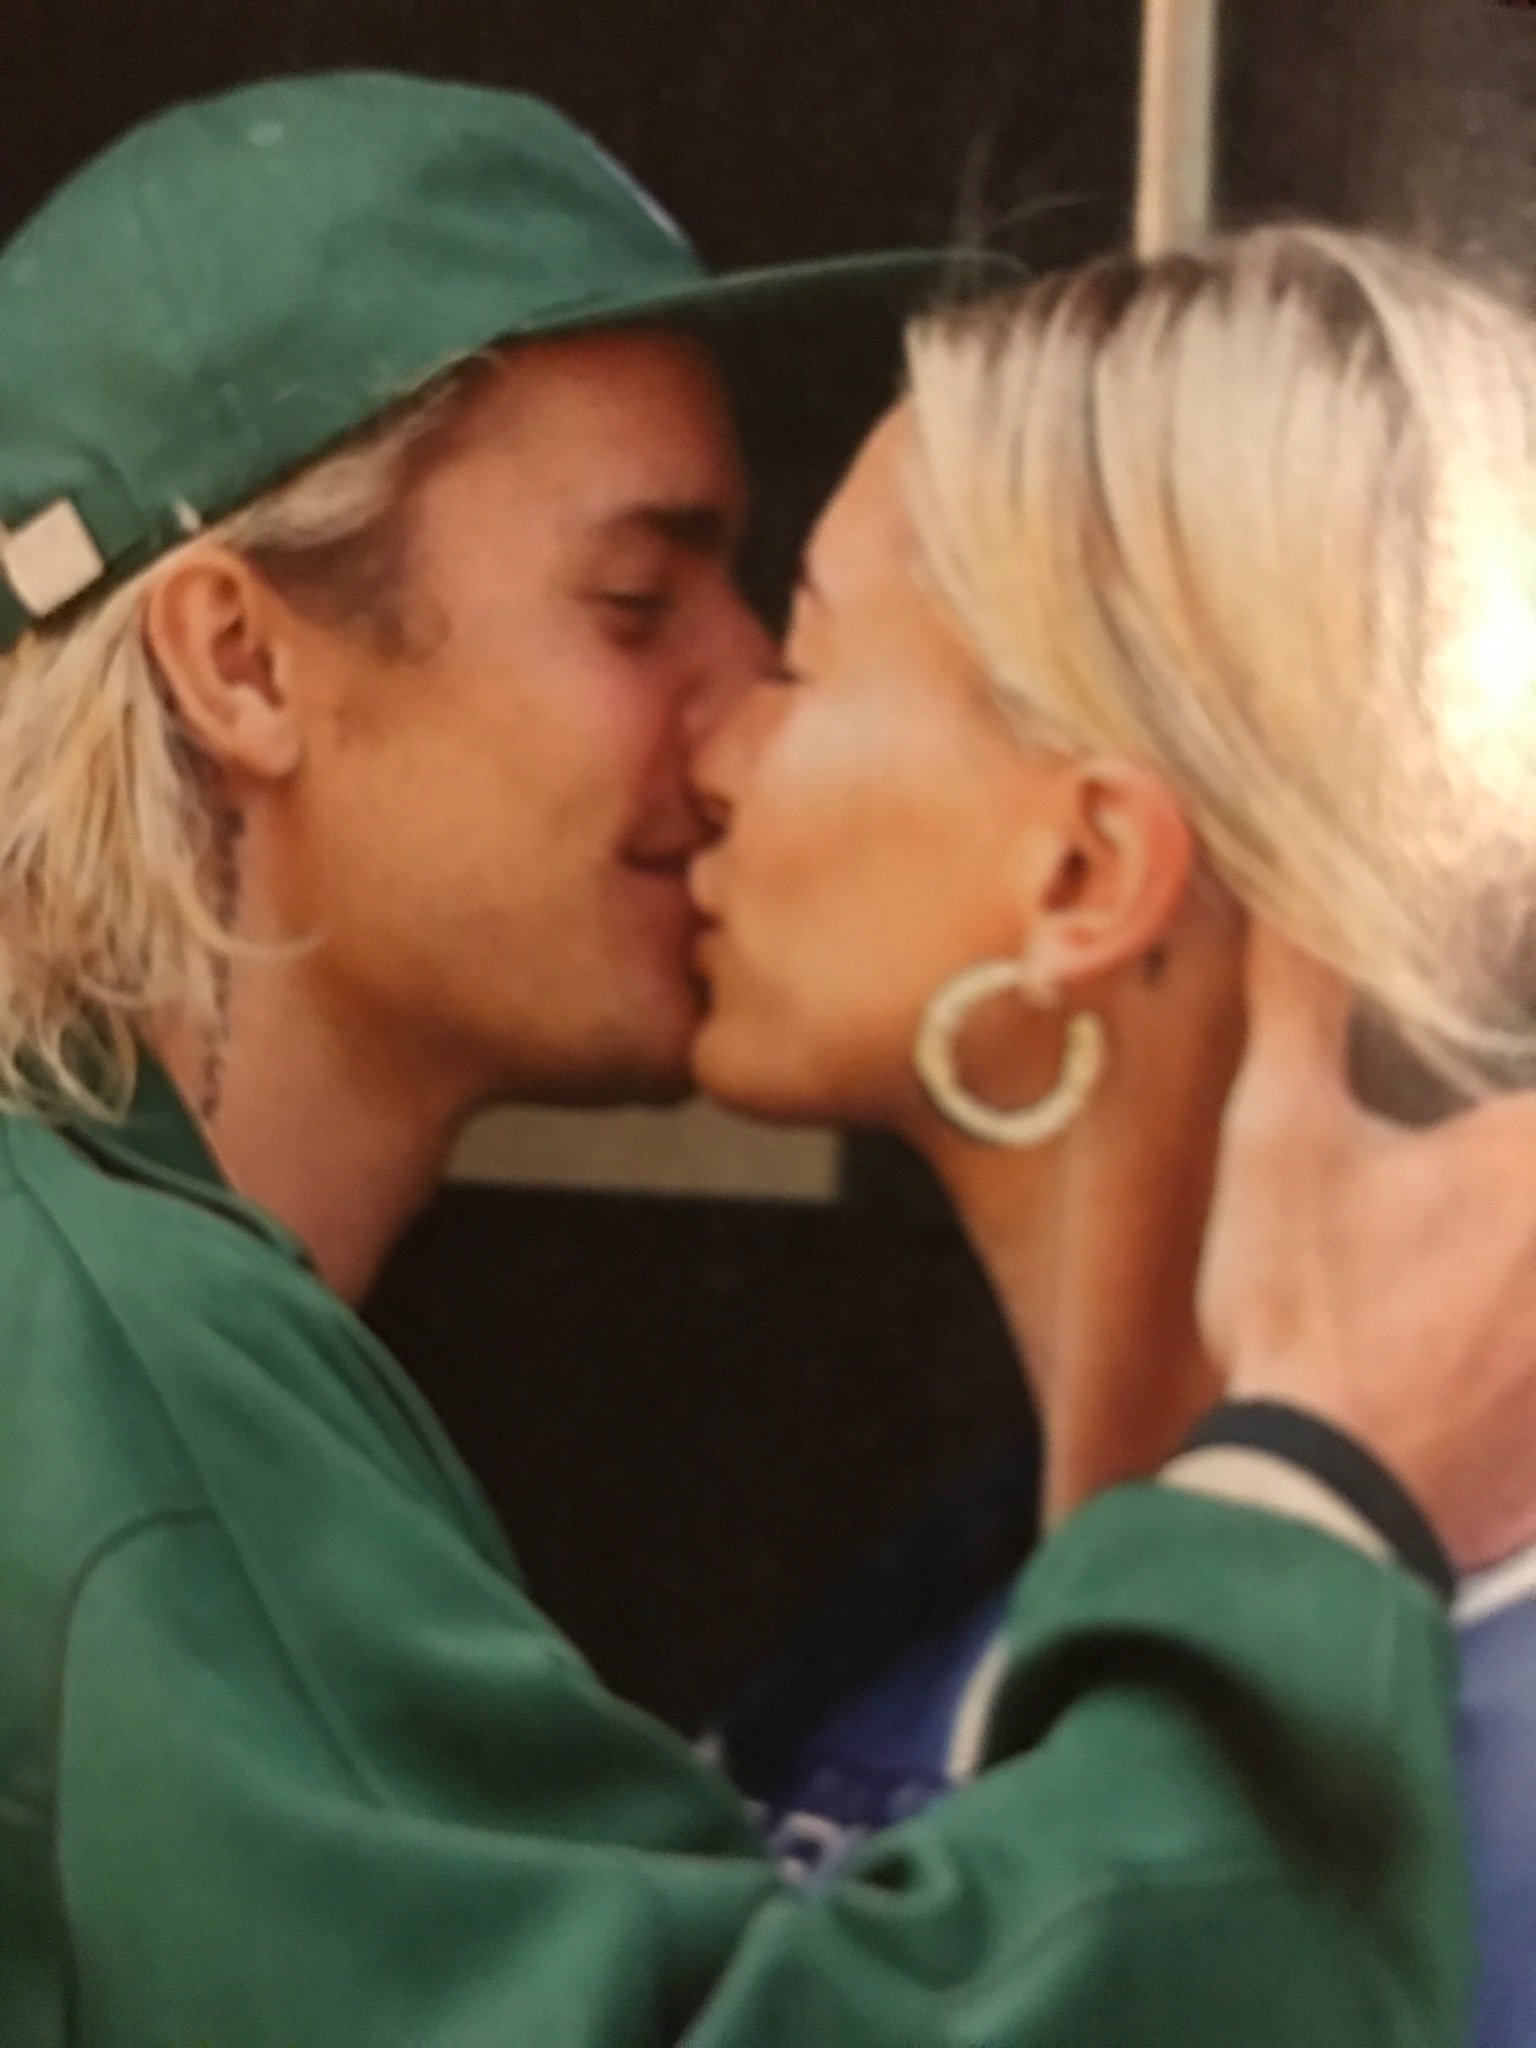 I'm a proud Belieber I love Justin Bieber and Hailey Baldwin THIS IS A FAN ACCOUNTJustin and Hailey 💍👰🤵💞